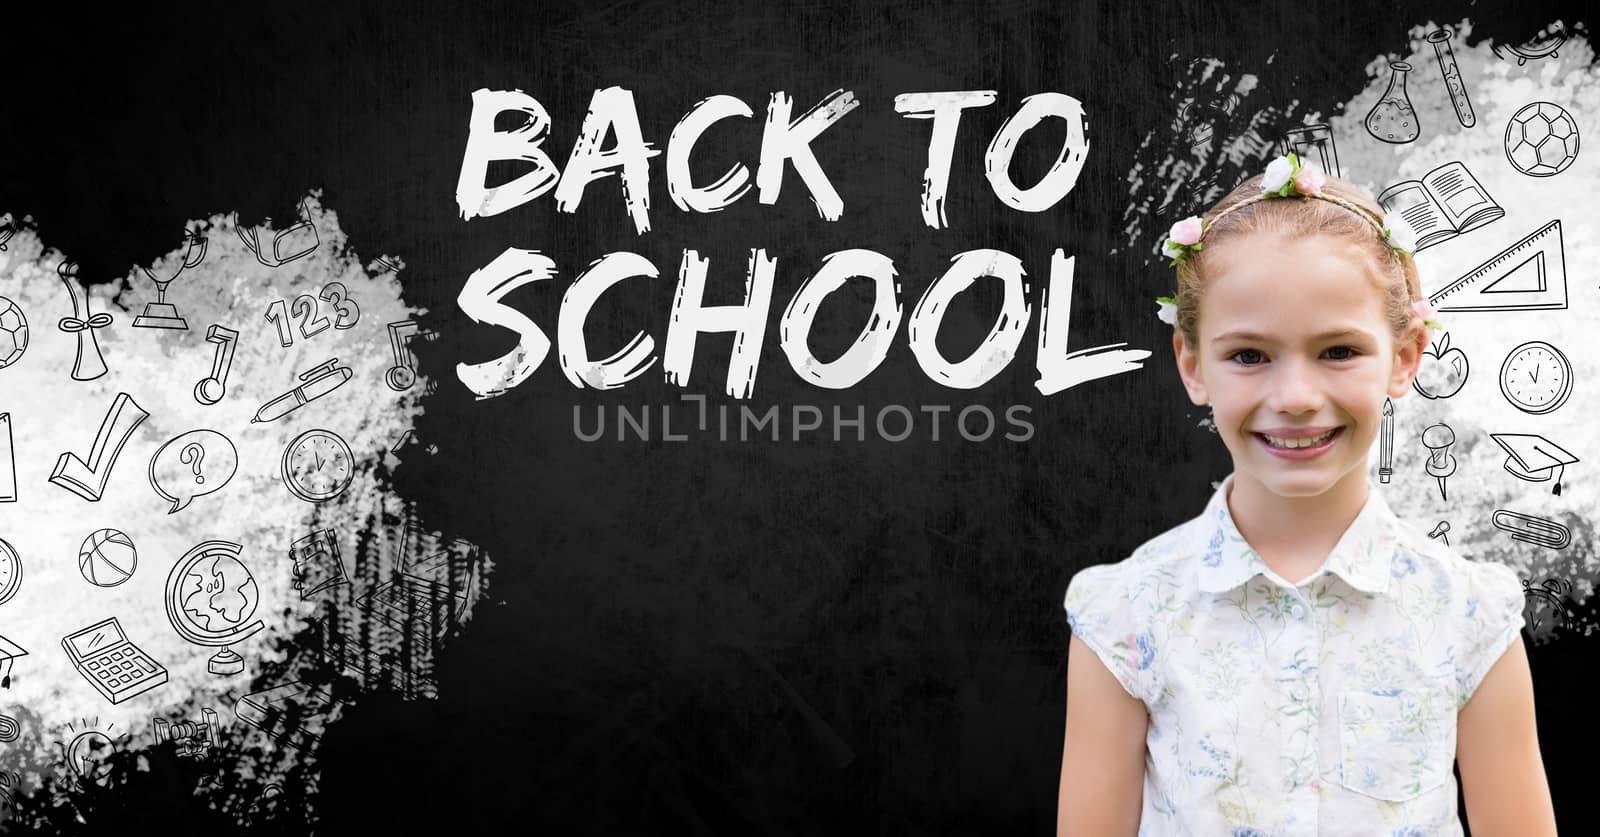 Digital composite of Girl and Back to school text with education drawings on blackboard